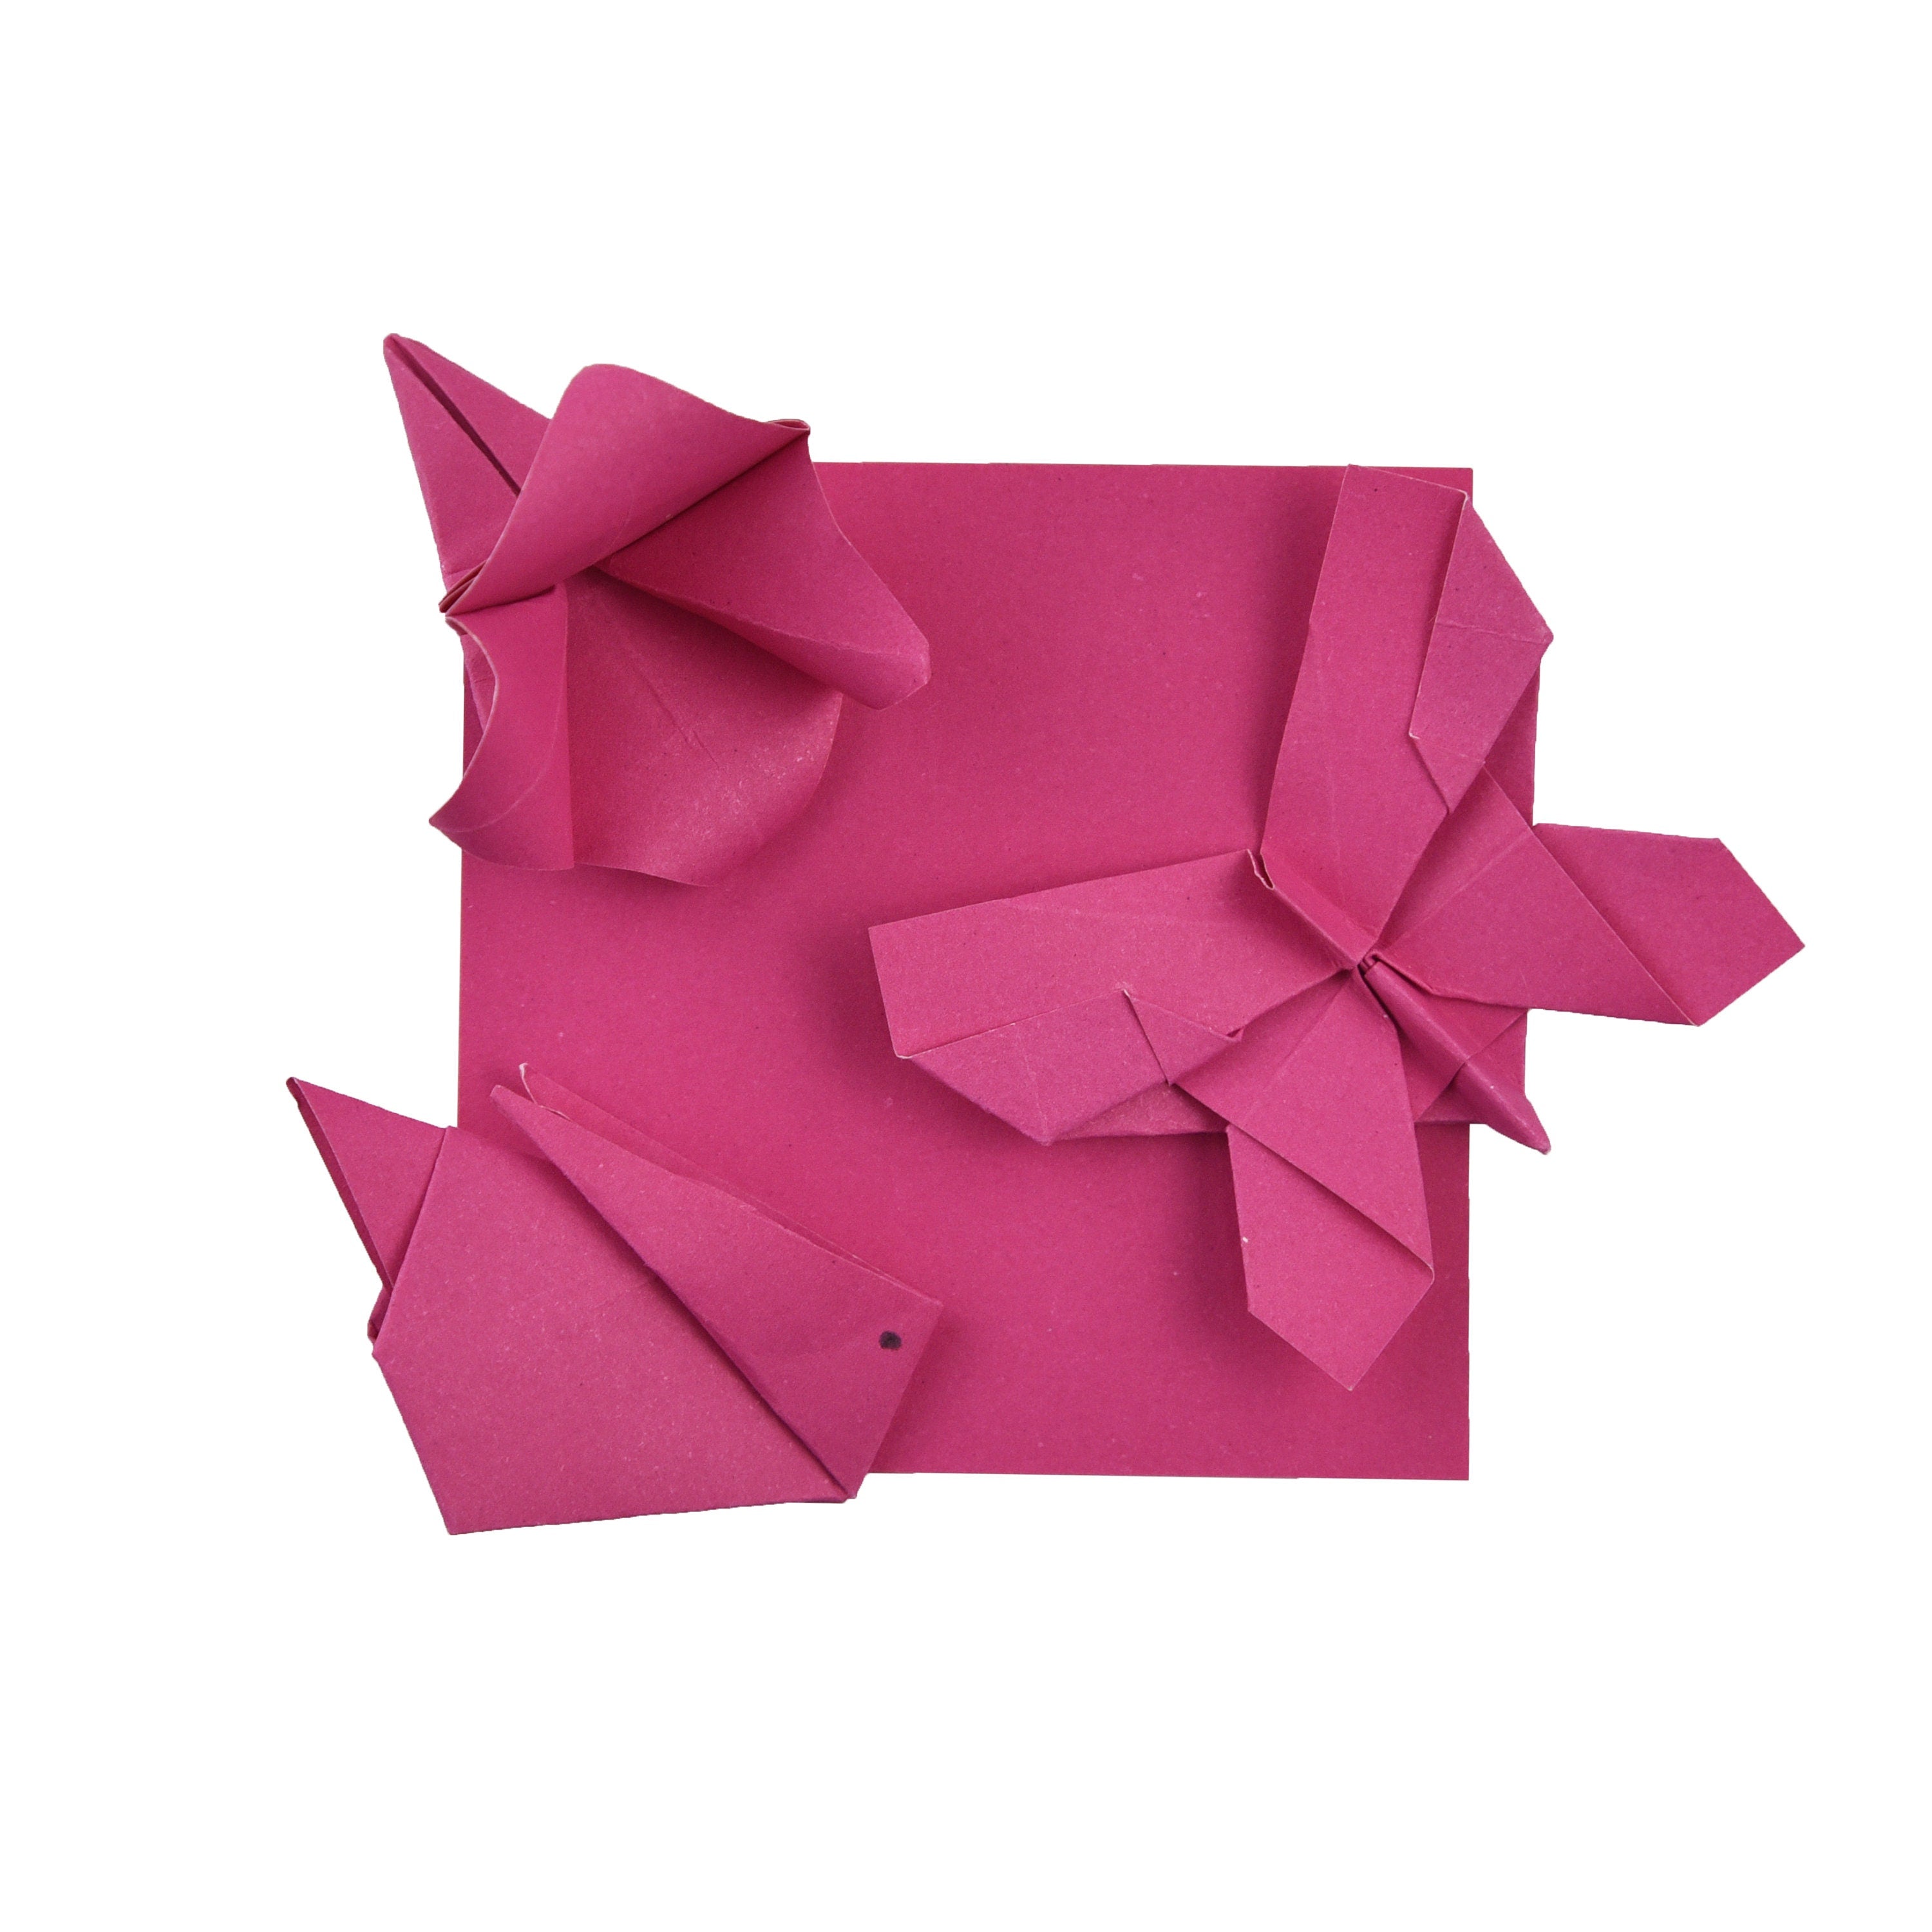 100 Origami Paper Sheets 6x6 inches Square Paper Pack for Folding, Origami Cranes, and Decoration - S14